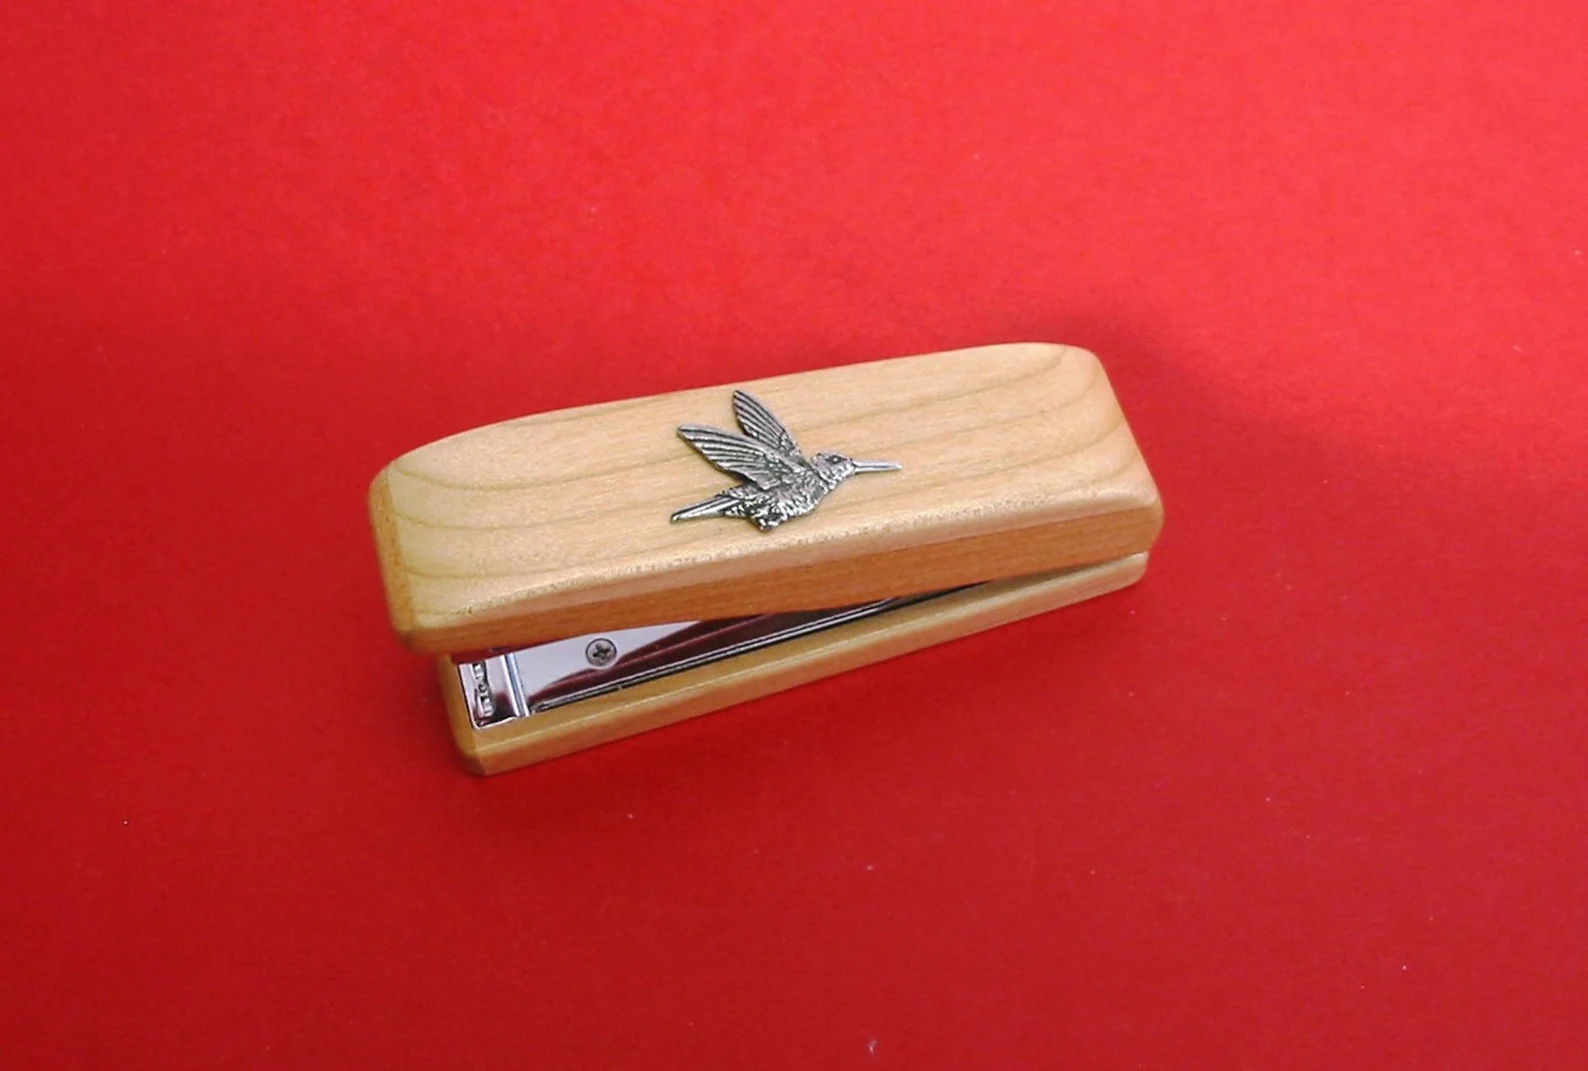 Hummingbird Stapler as a functional accessory and office decor.